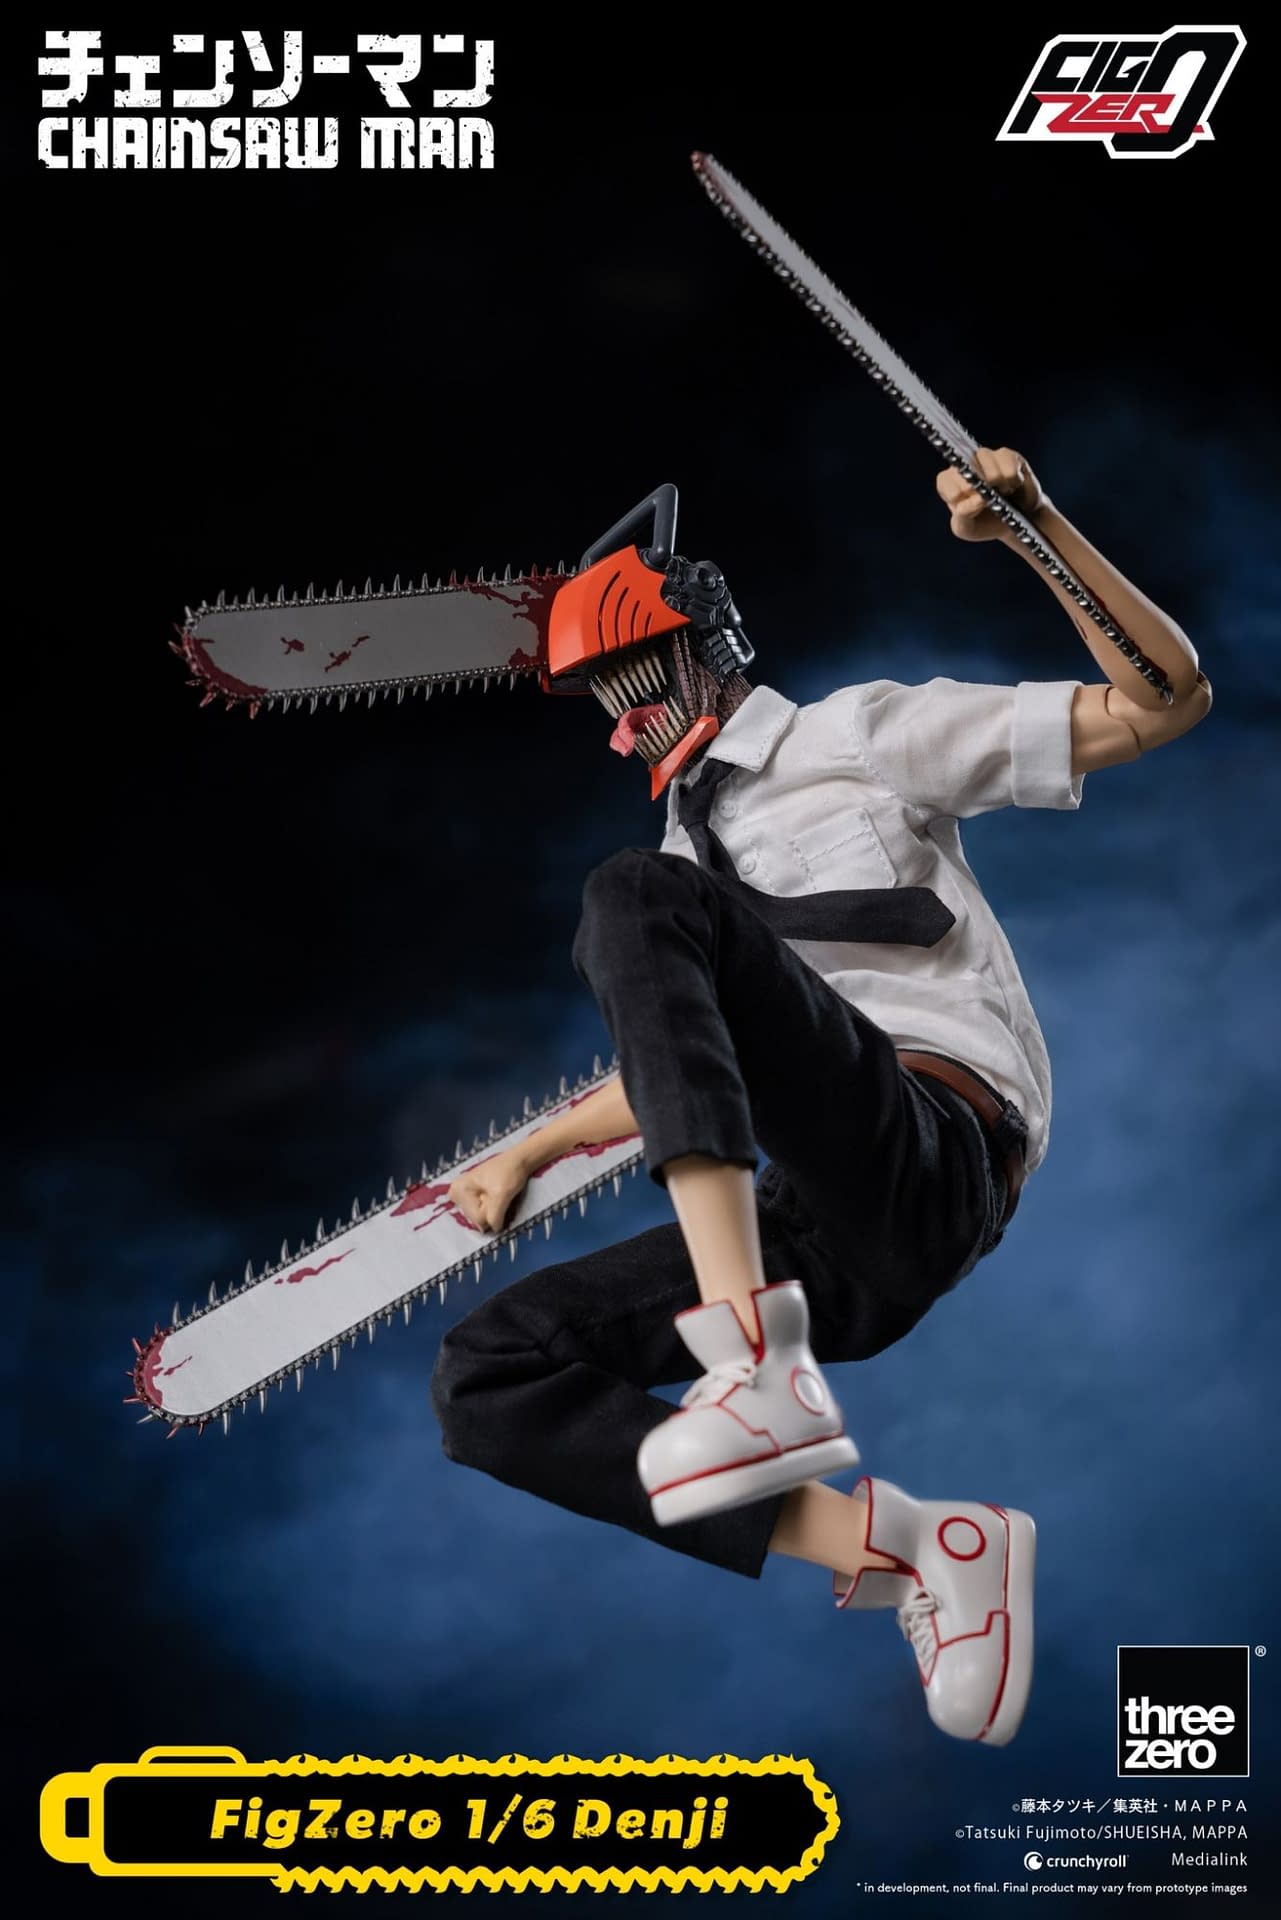 Threezero Teases Two Chainsaw Man 1/6 Scale Figures Are Coming Soon 